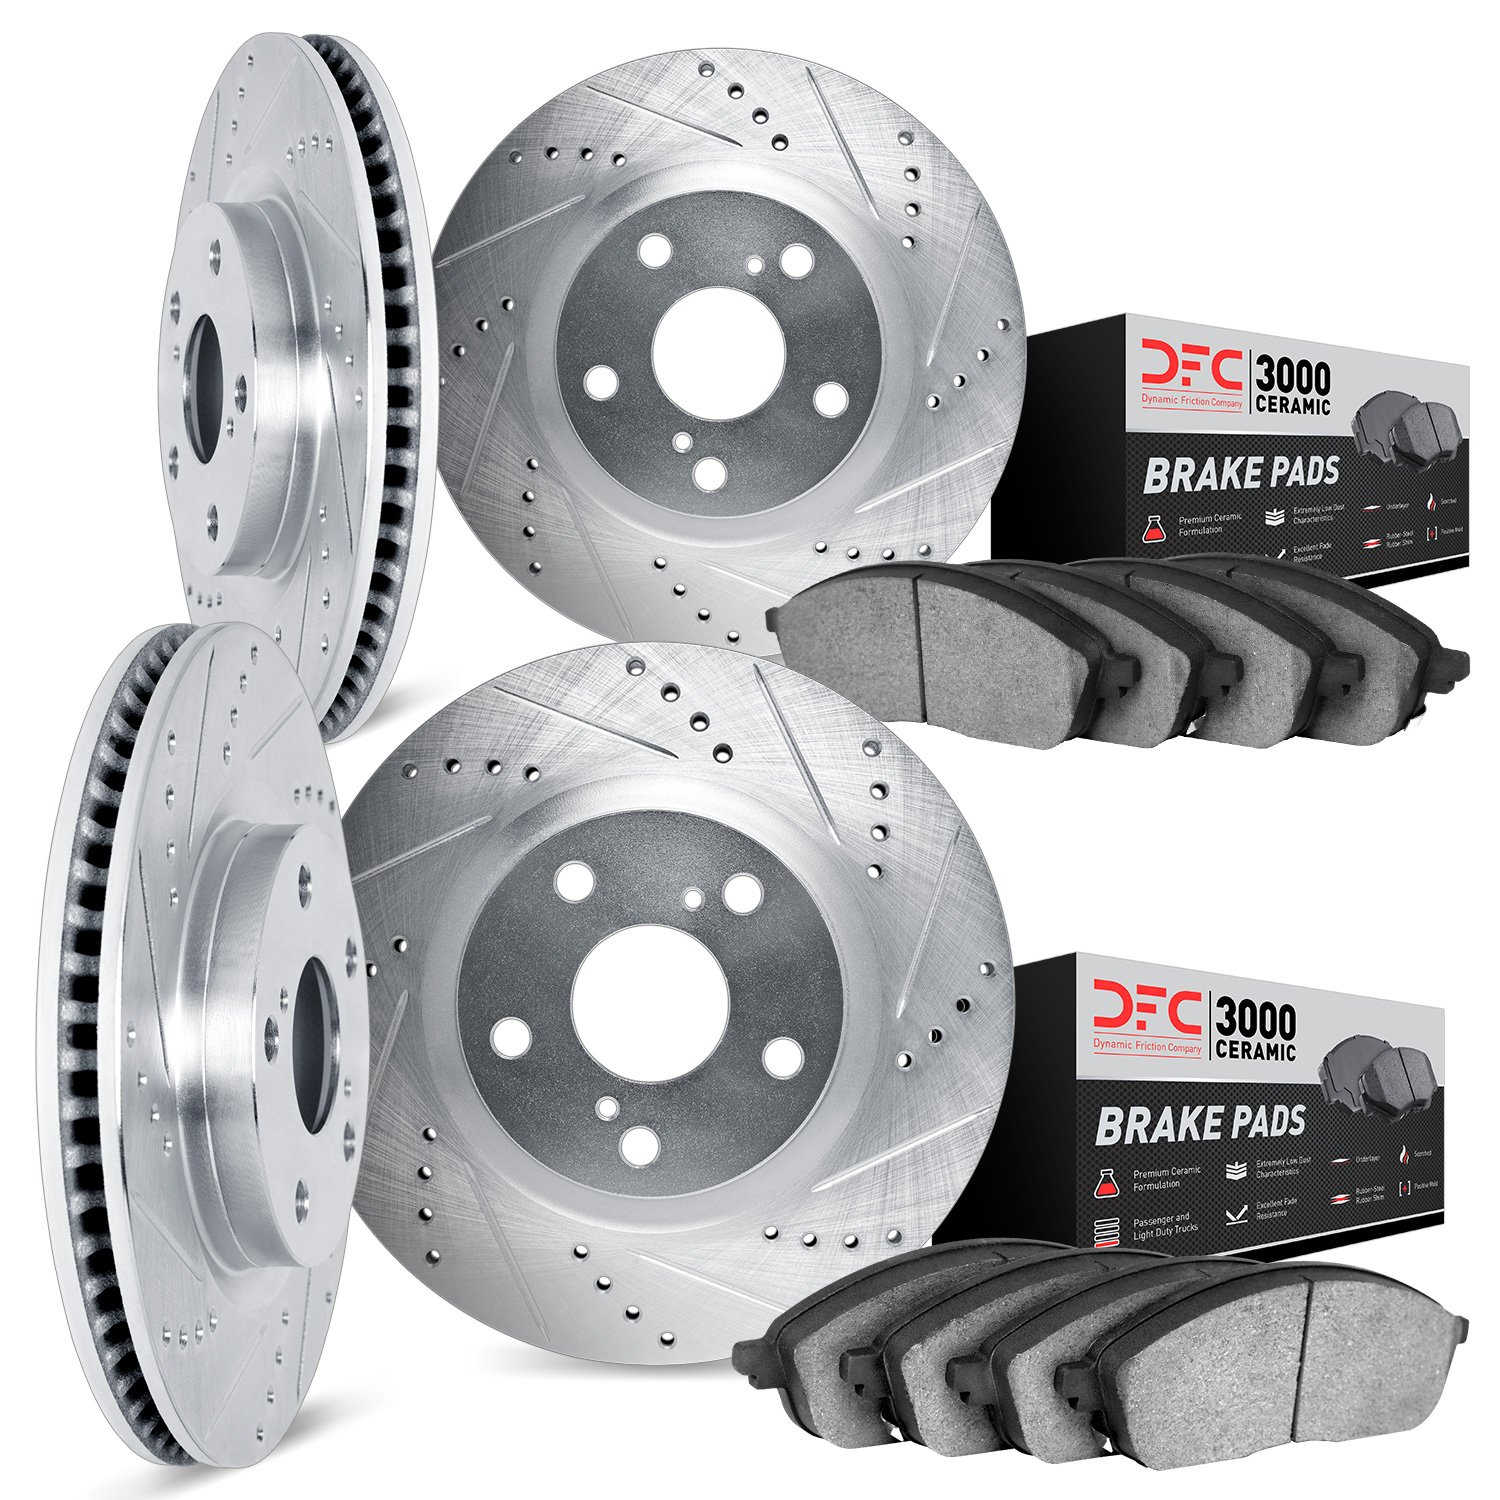 7304-31035 Drilled/Slotted Brake Rotor with 3000-Series Ceramic Brake Pads Kit [Silver], 2003-2008 BMW, Position: Front and Rear